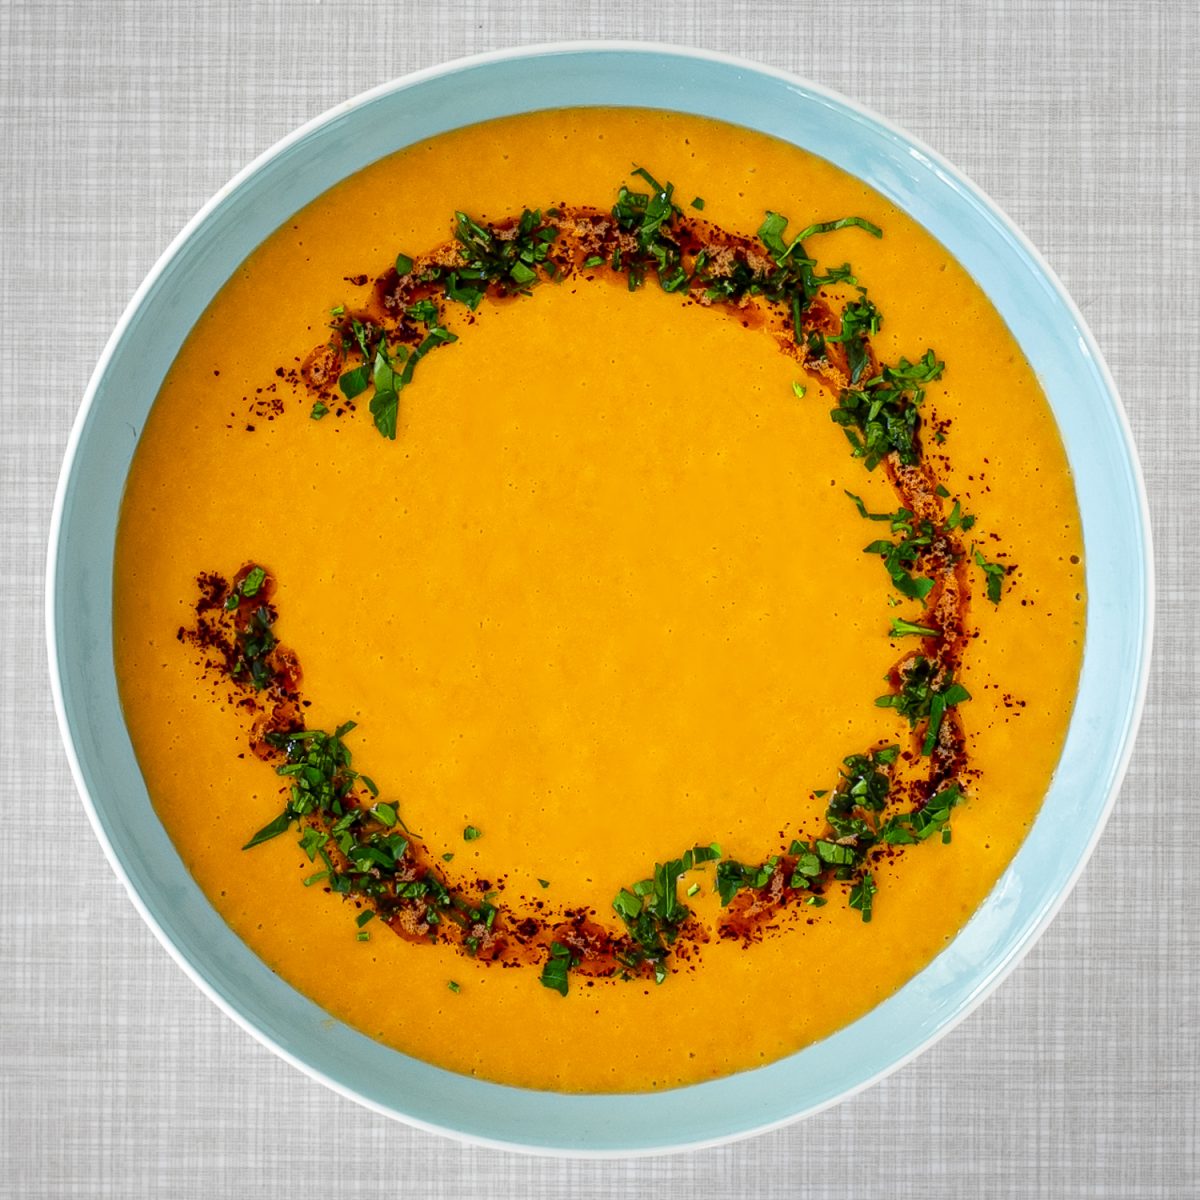 A turquoise plate filled with a creamy red lentil soup, on a grey vintage kitchen table